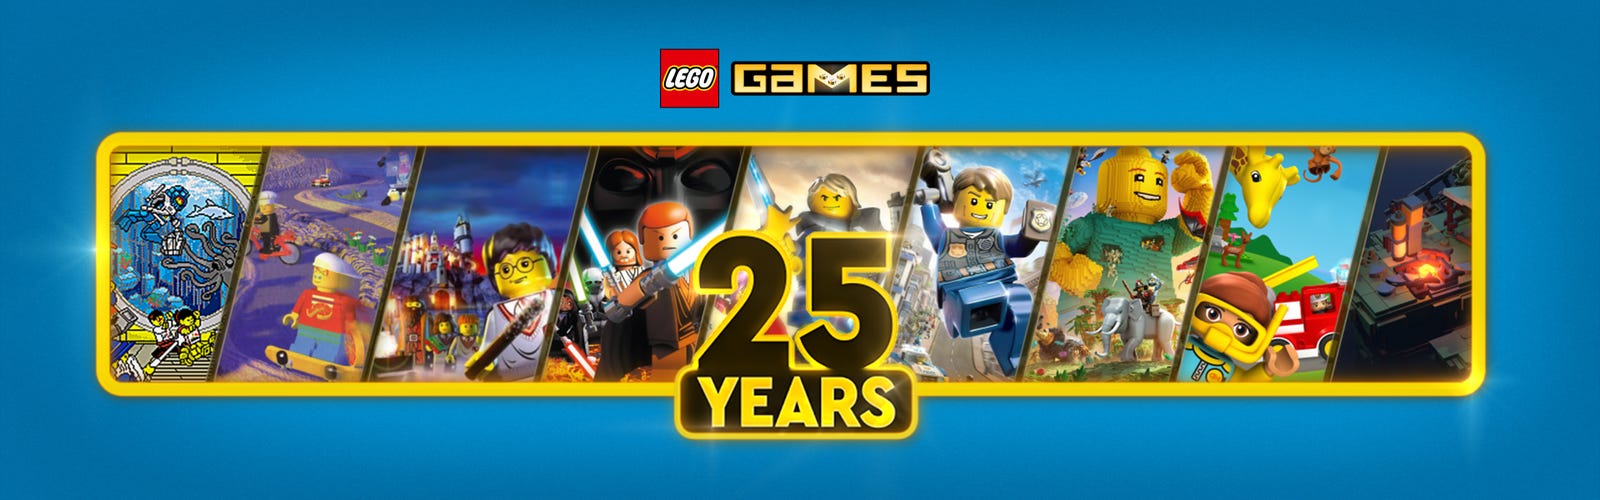 of LEGO® Games Official LEGO® Shop GB